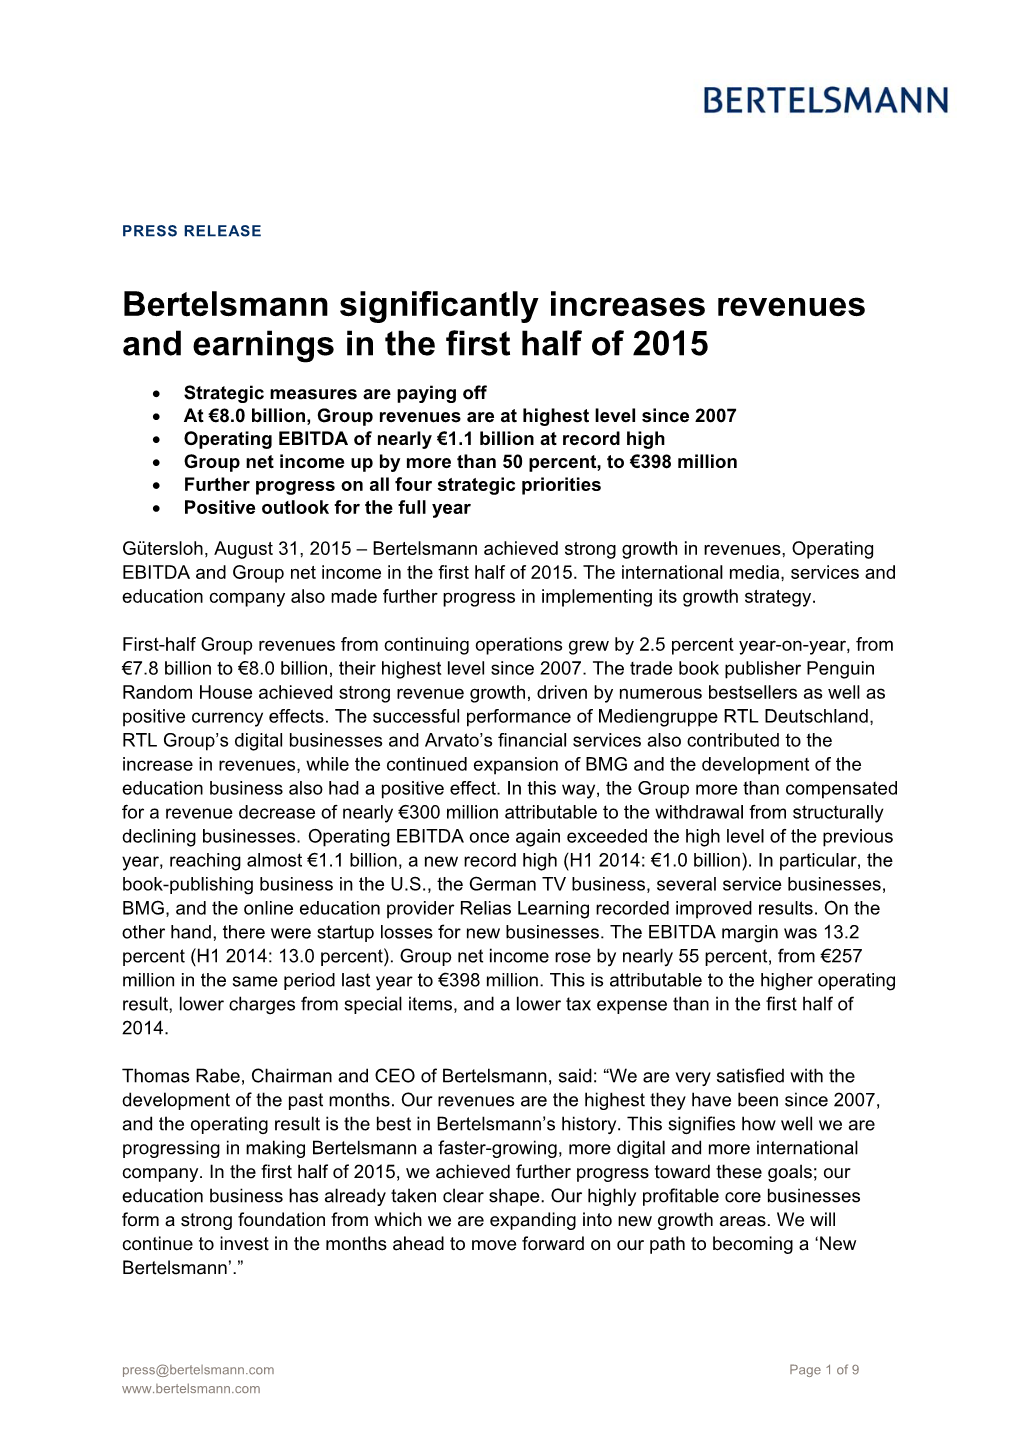 Bertelsmann Significantly Increases Revenues and Earnings in the First Half of 2015